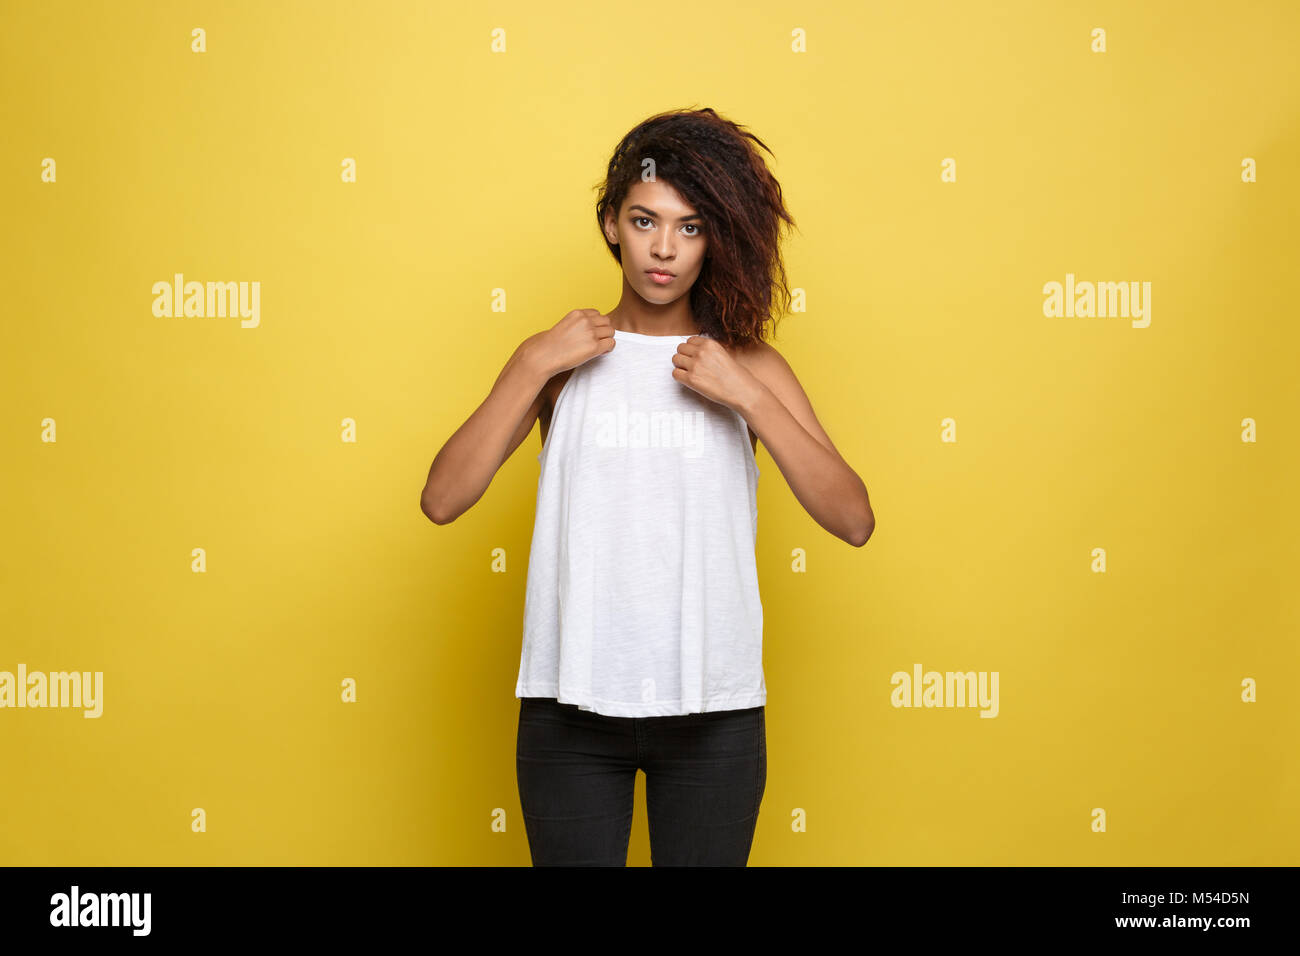 Beautiful attractive African American woman posting and dressed up her white t-shirt. Yellow studio background. Copy Space Stock Photo